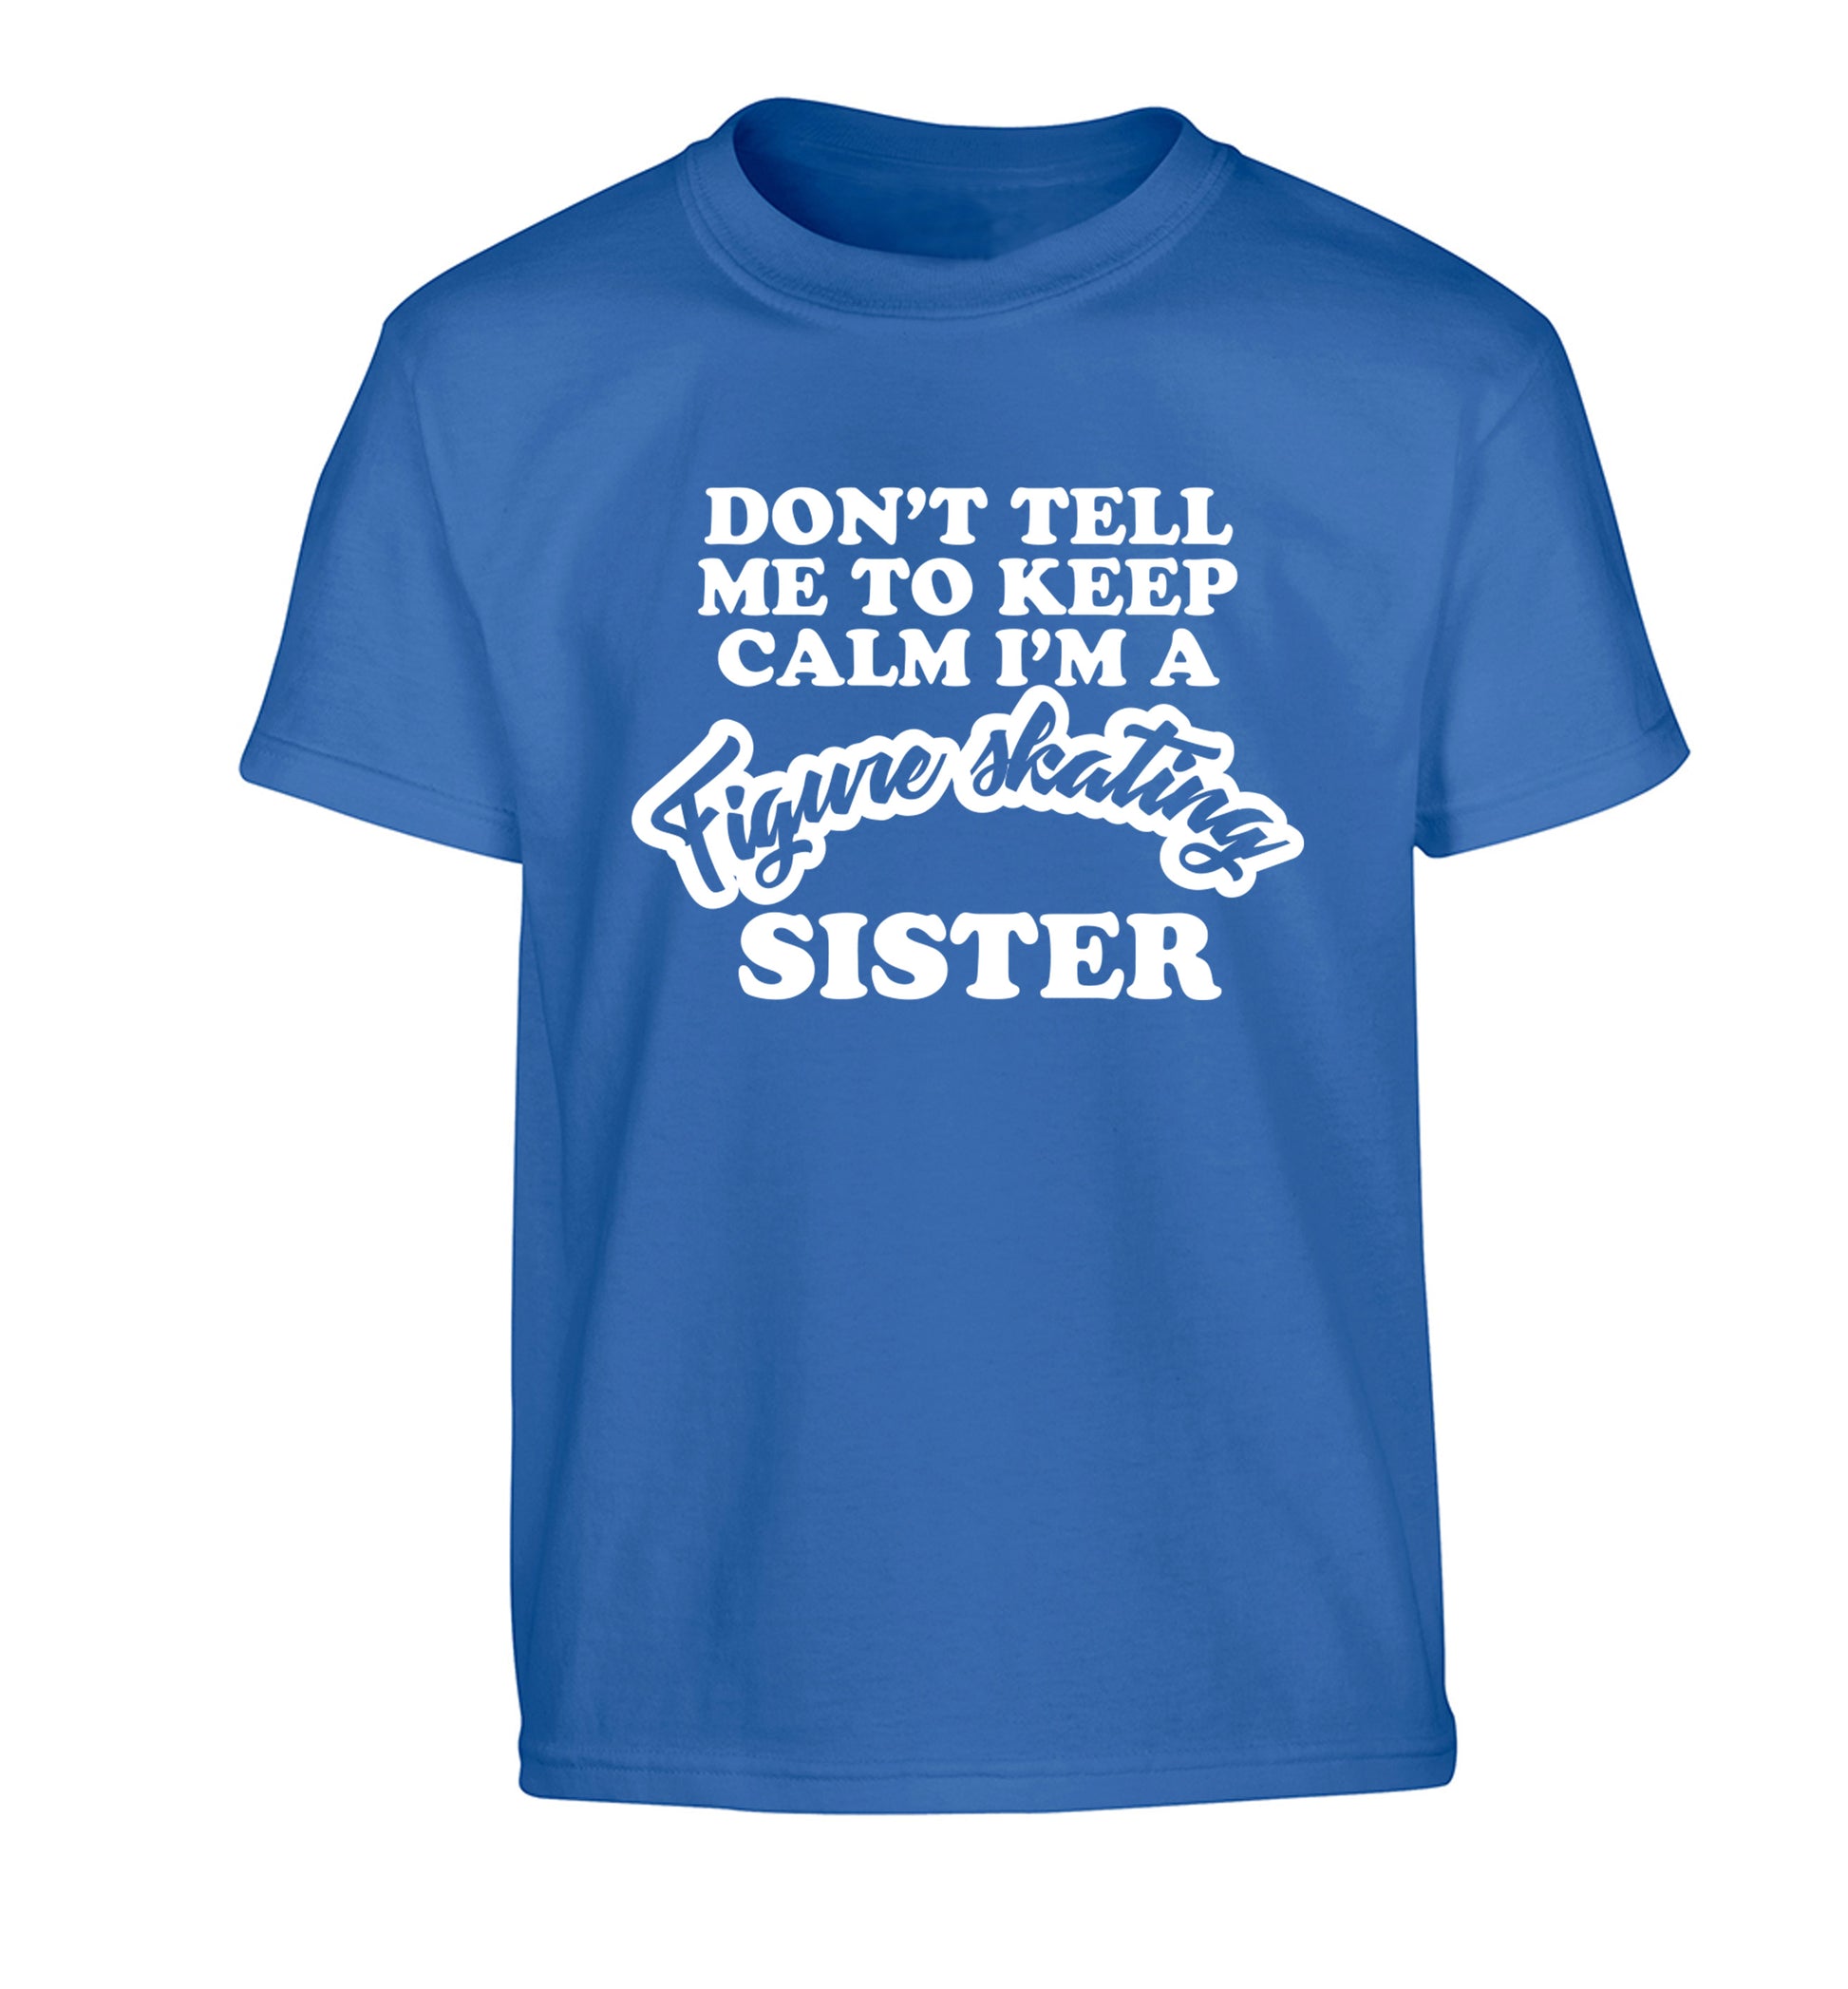 Don't tell me to keep calm I'm a figure skating sister Children's blue Tshirt 12-14 Years